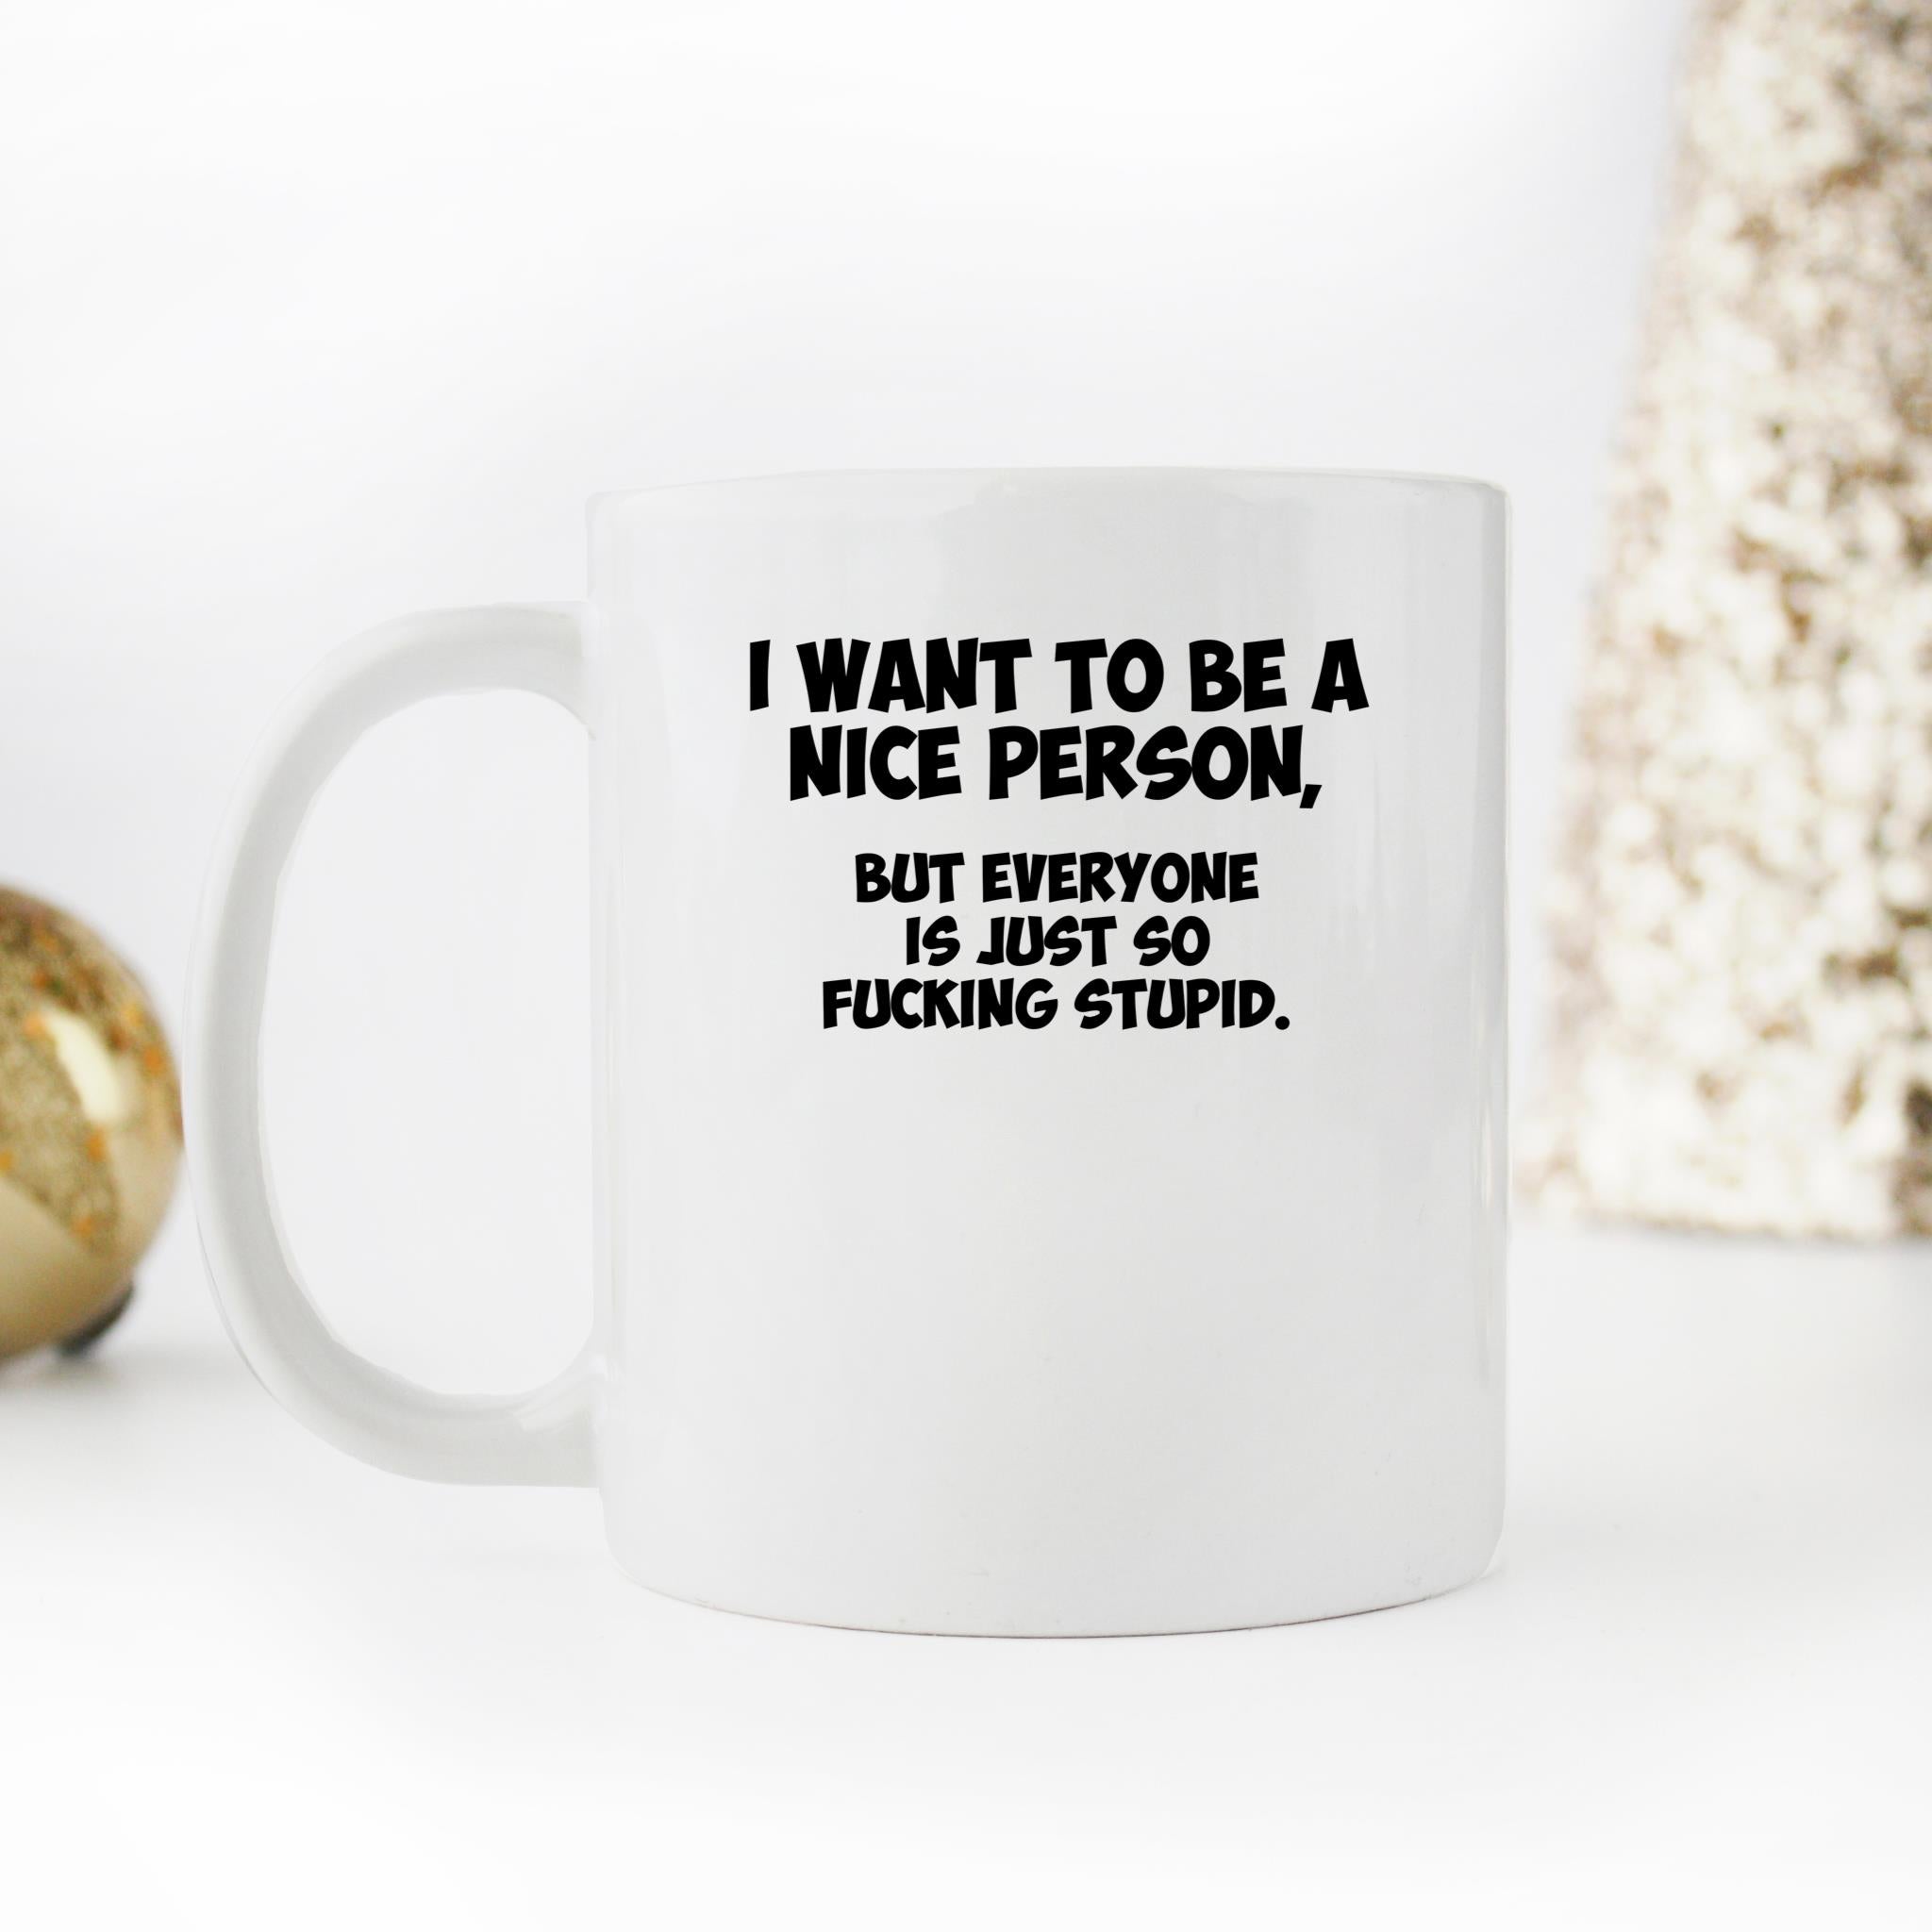 Skitongifts Funny Ceramic Novelty Coffee Mug I Want To Be A Nice Person, But Everyone Is Just So Fucking Stupid 4Wc8Y1t